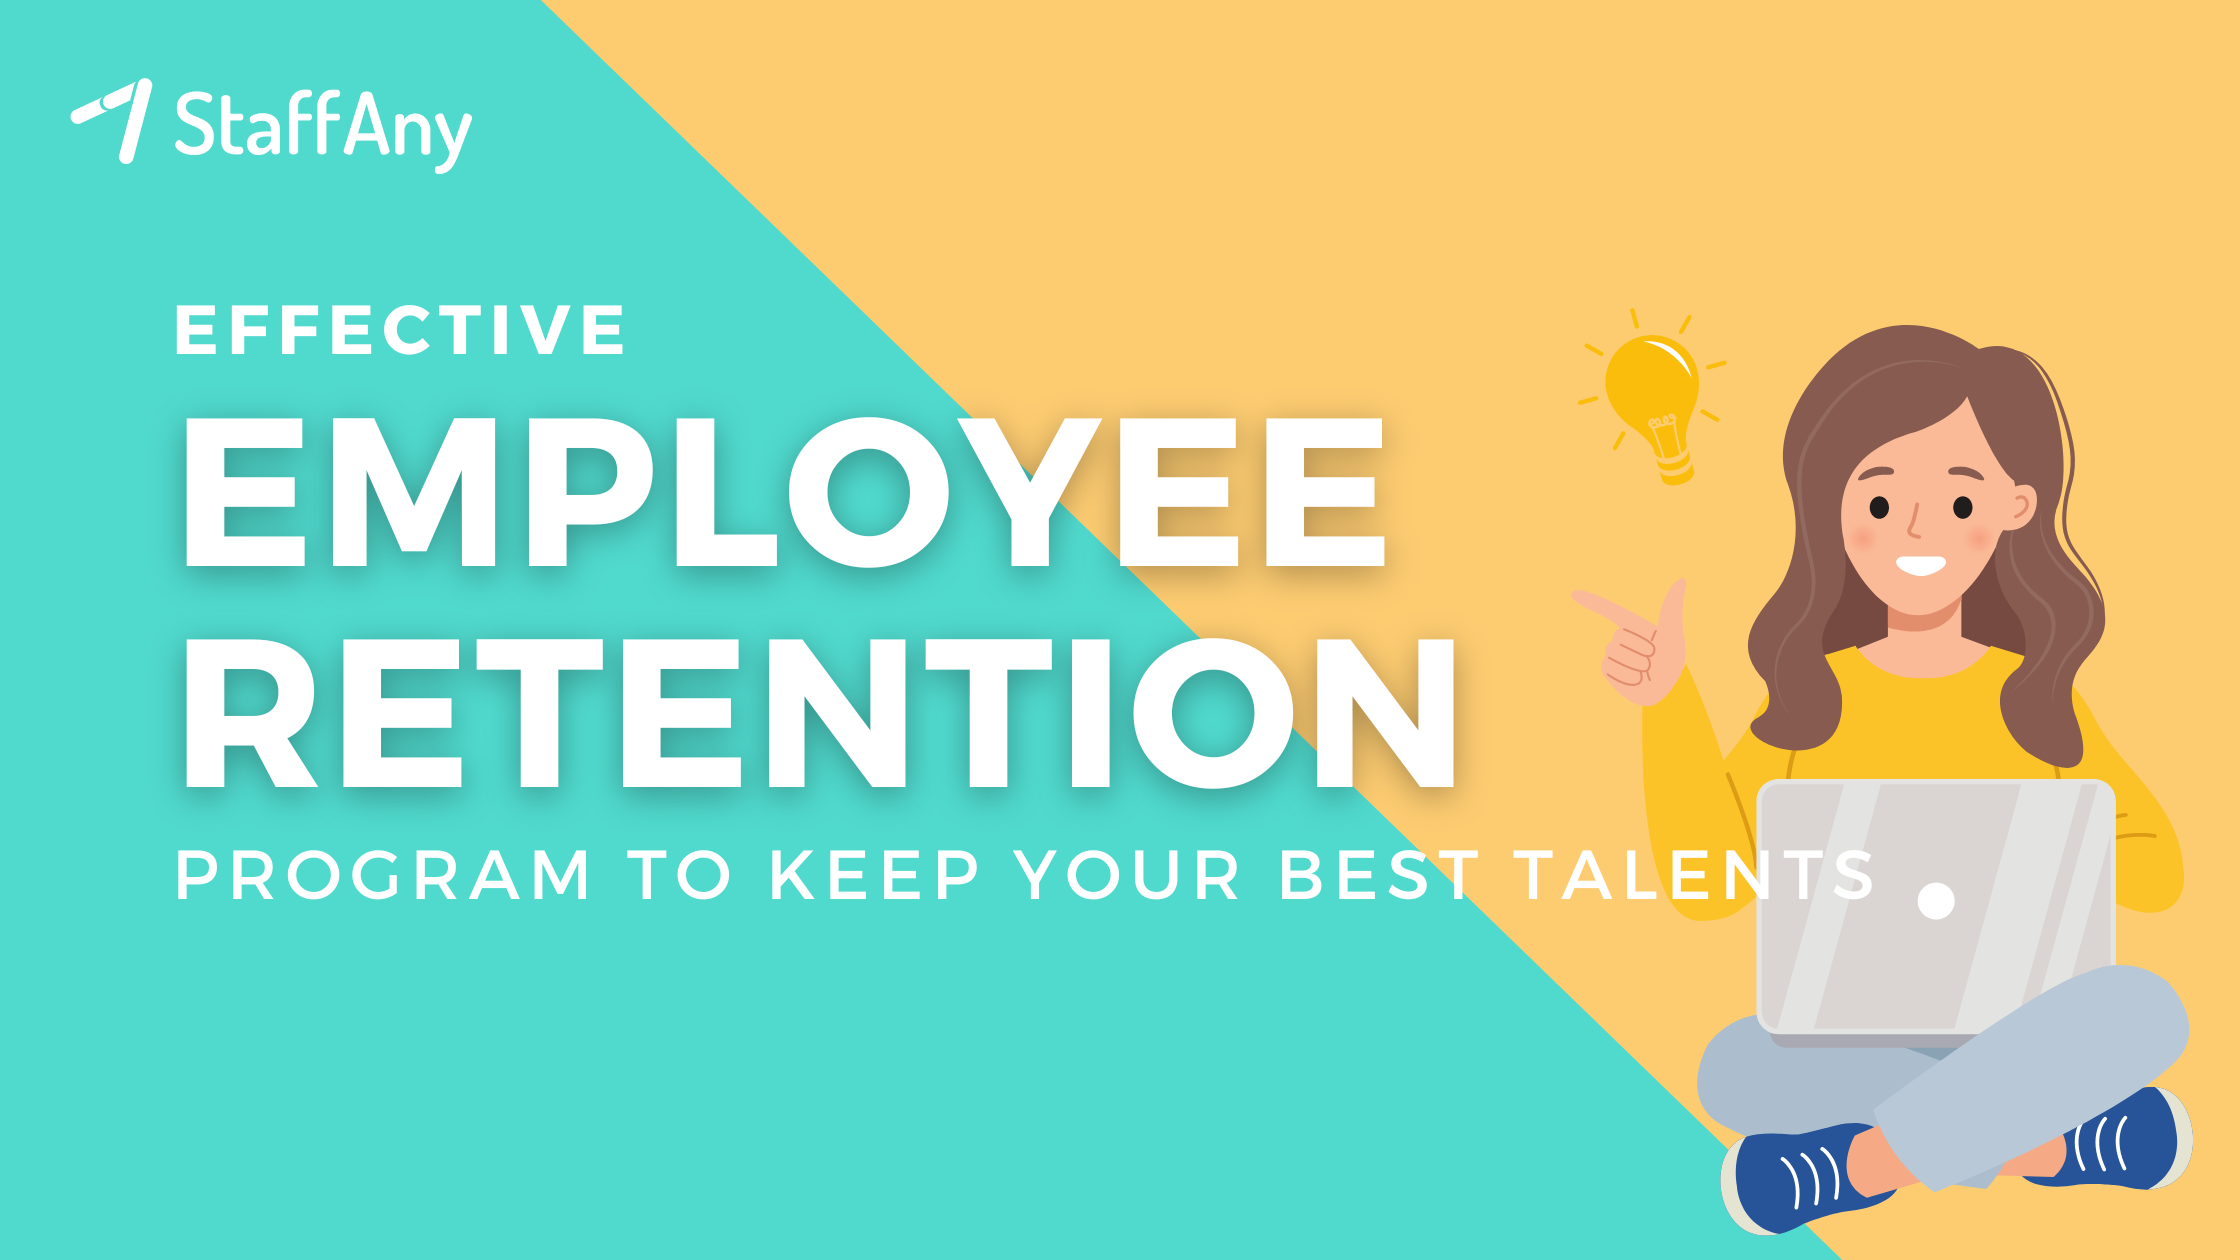 13 Employee Retention Programs to Retain Your Top Talents